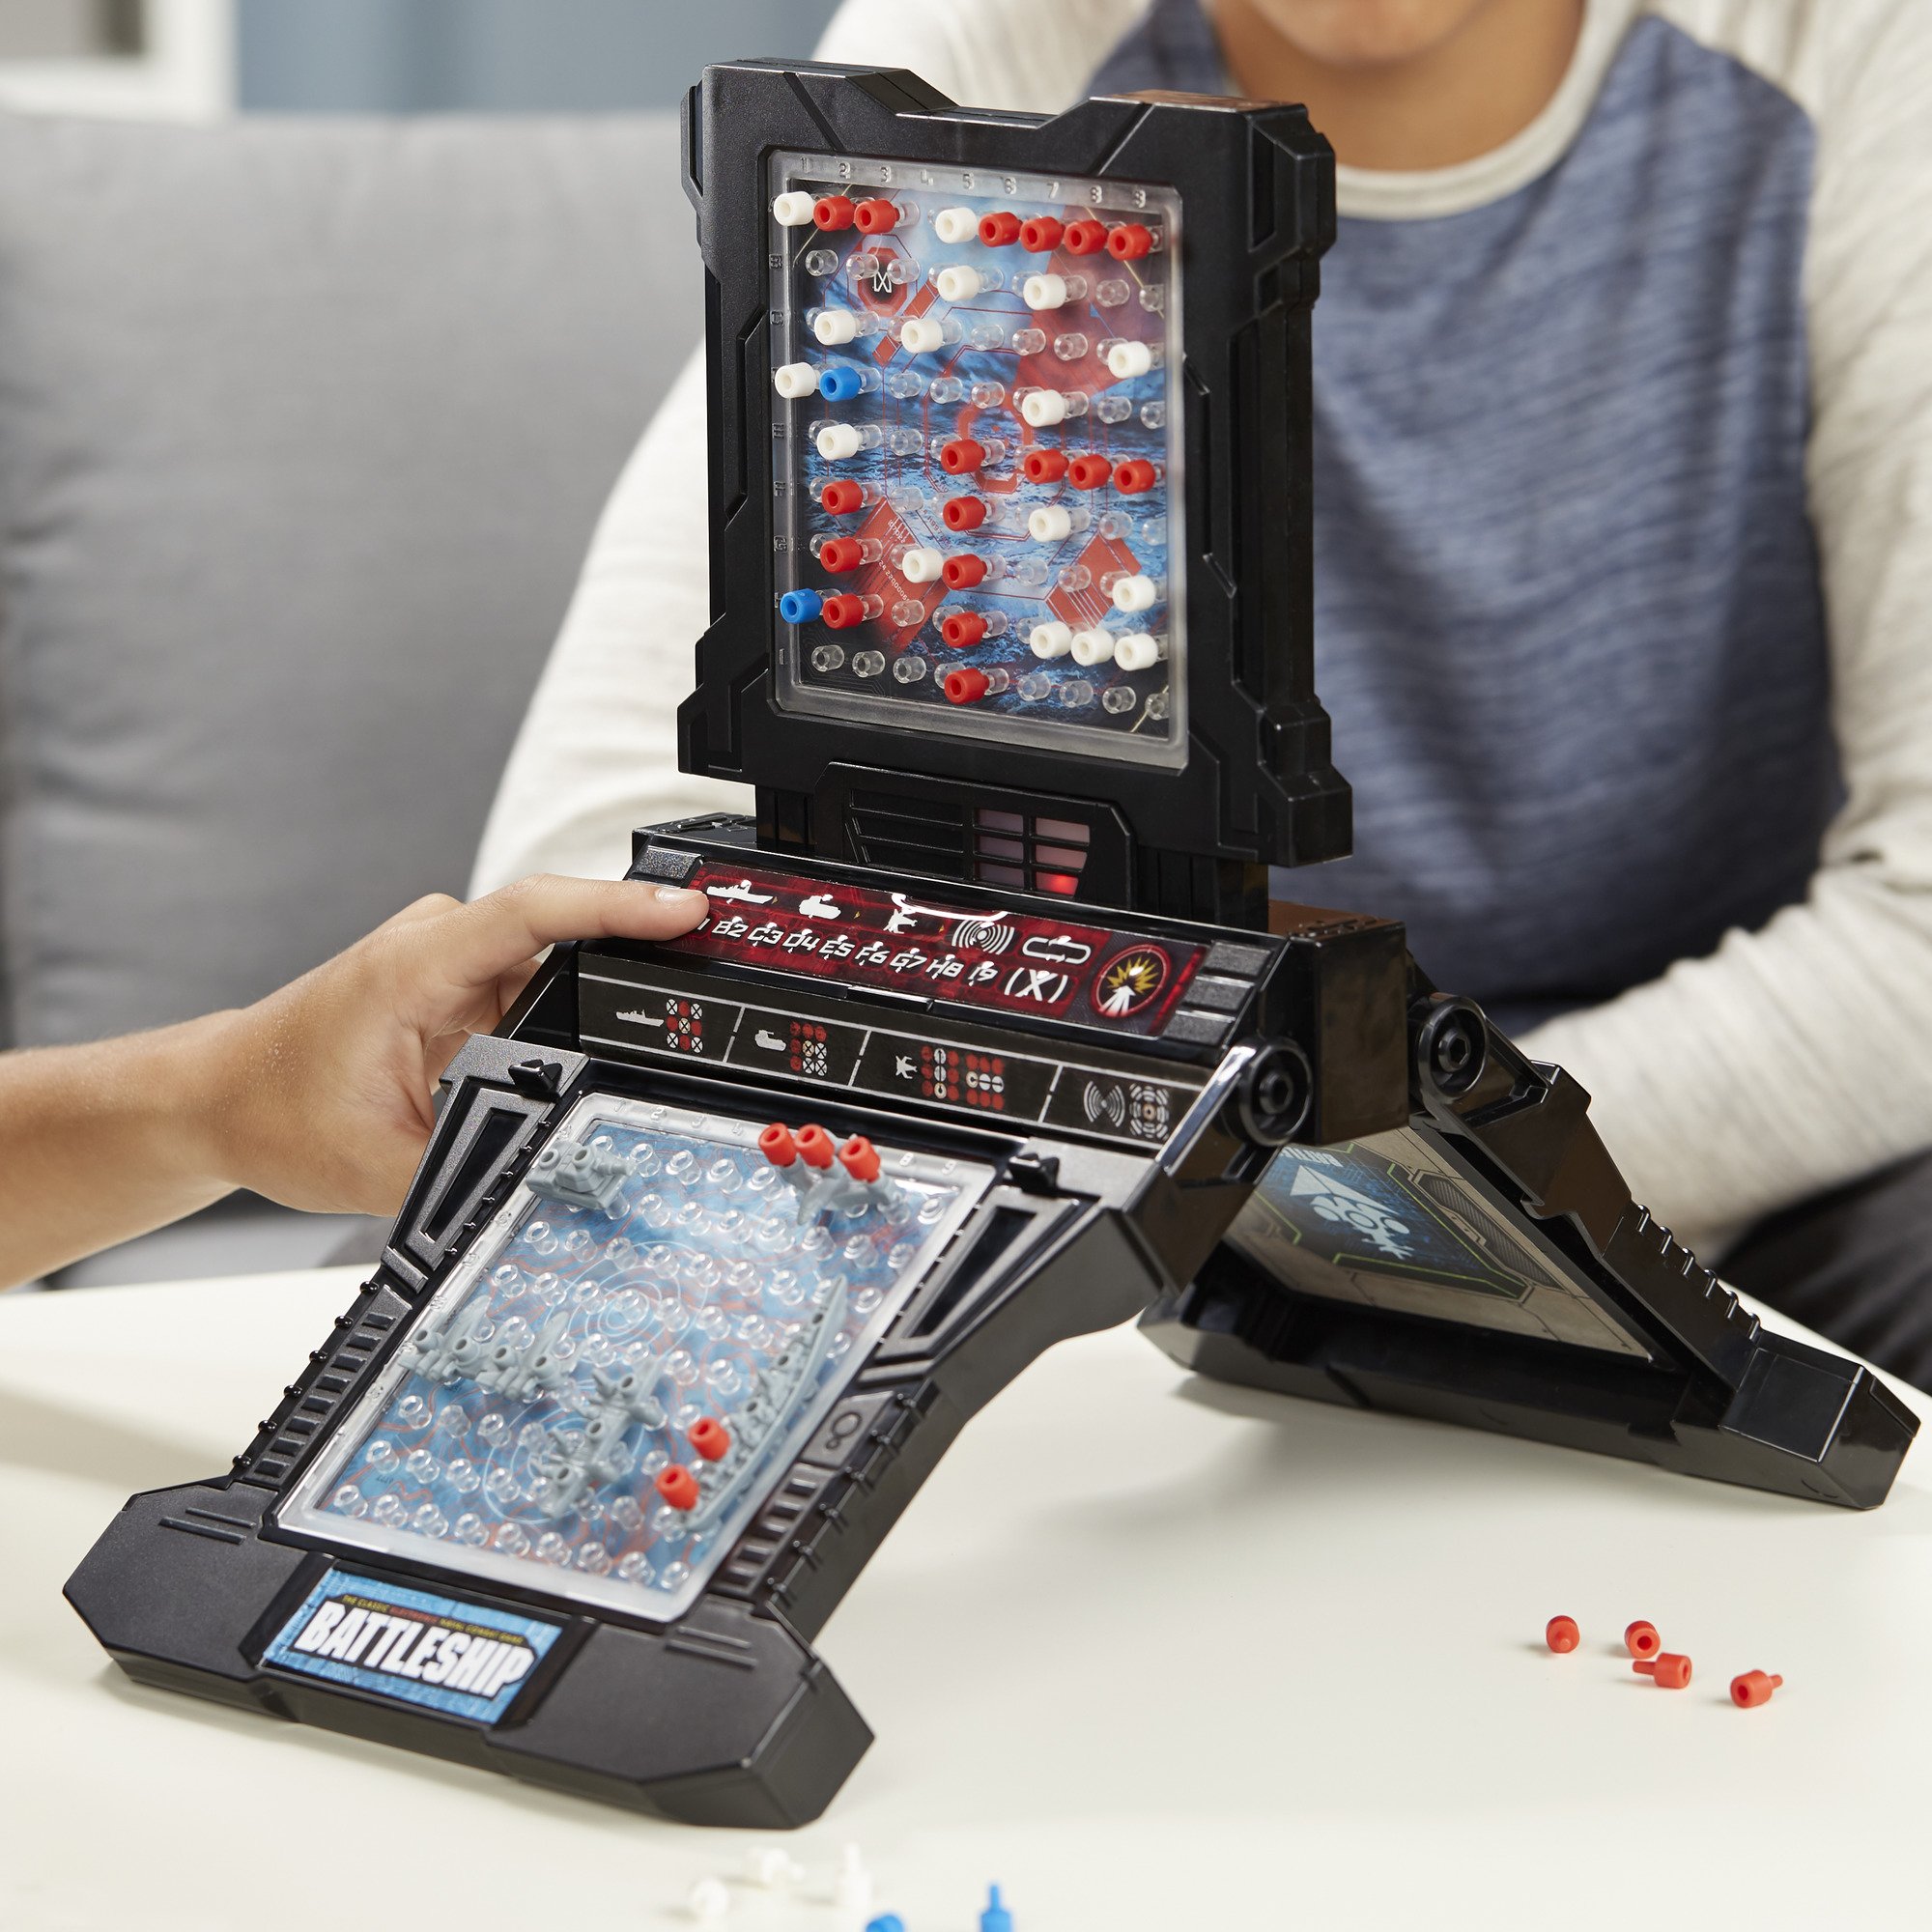 Hasbro Gaming Battleship Electronic Board Game, Strategy Board Games for Kids, Family Games for 1-2 Players, Electronic Battle Games, Ages 8 and Up